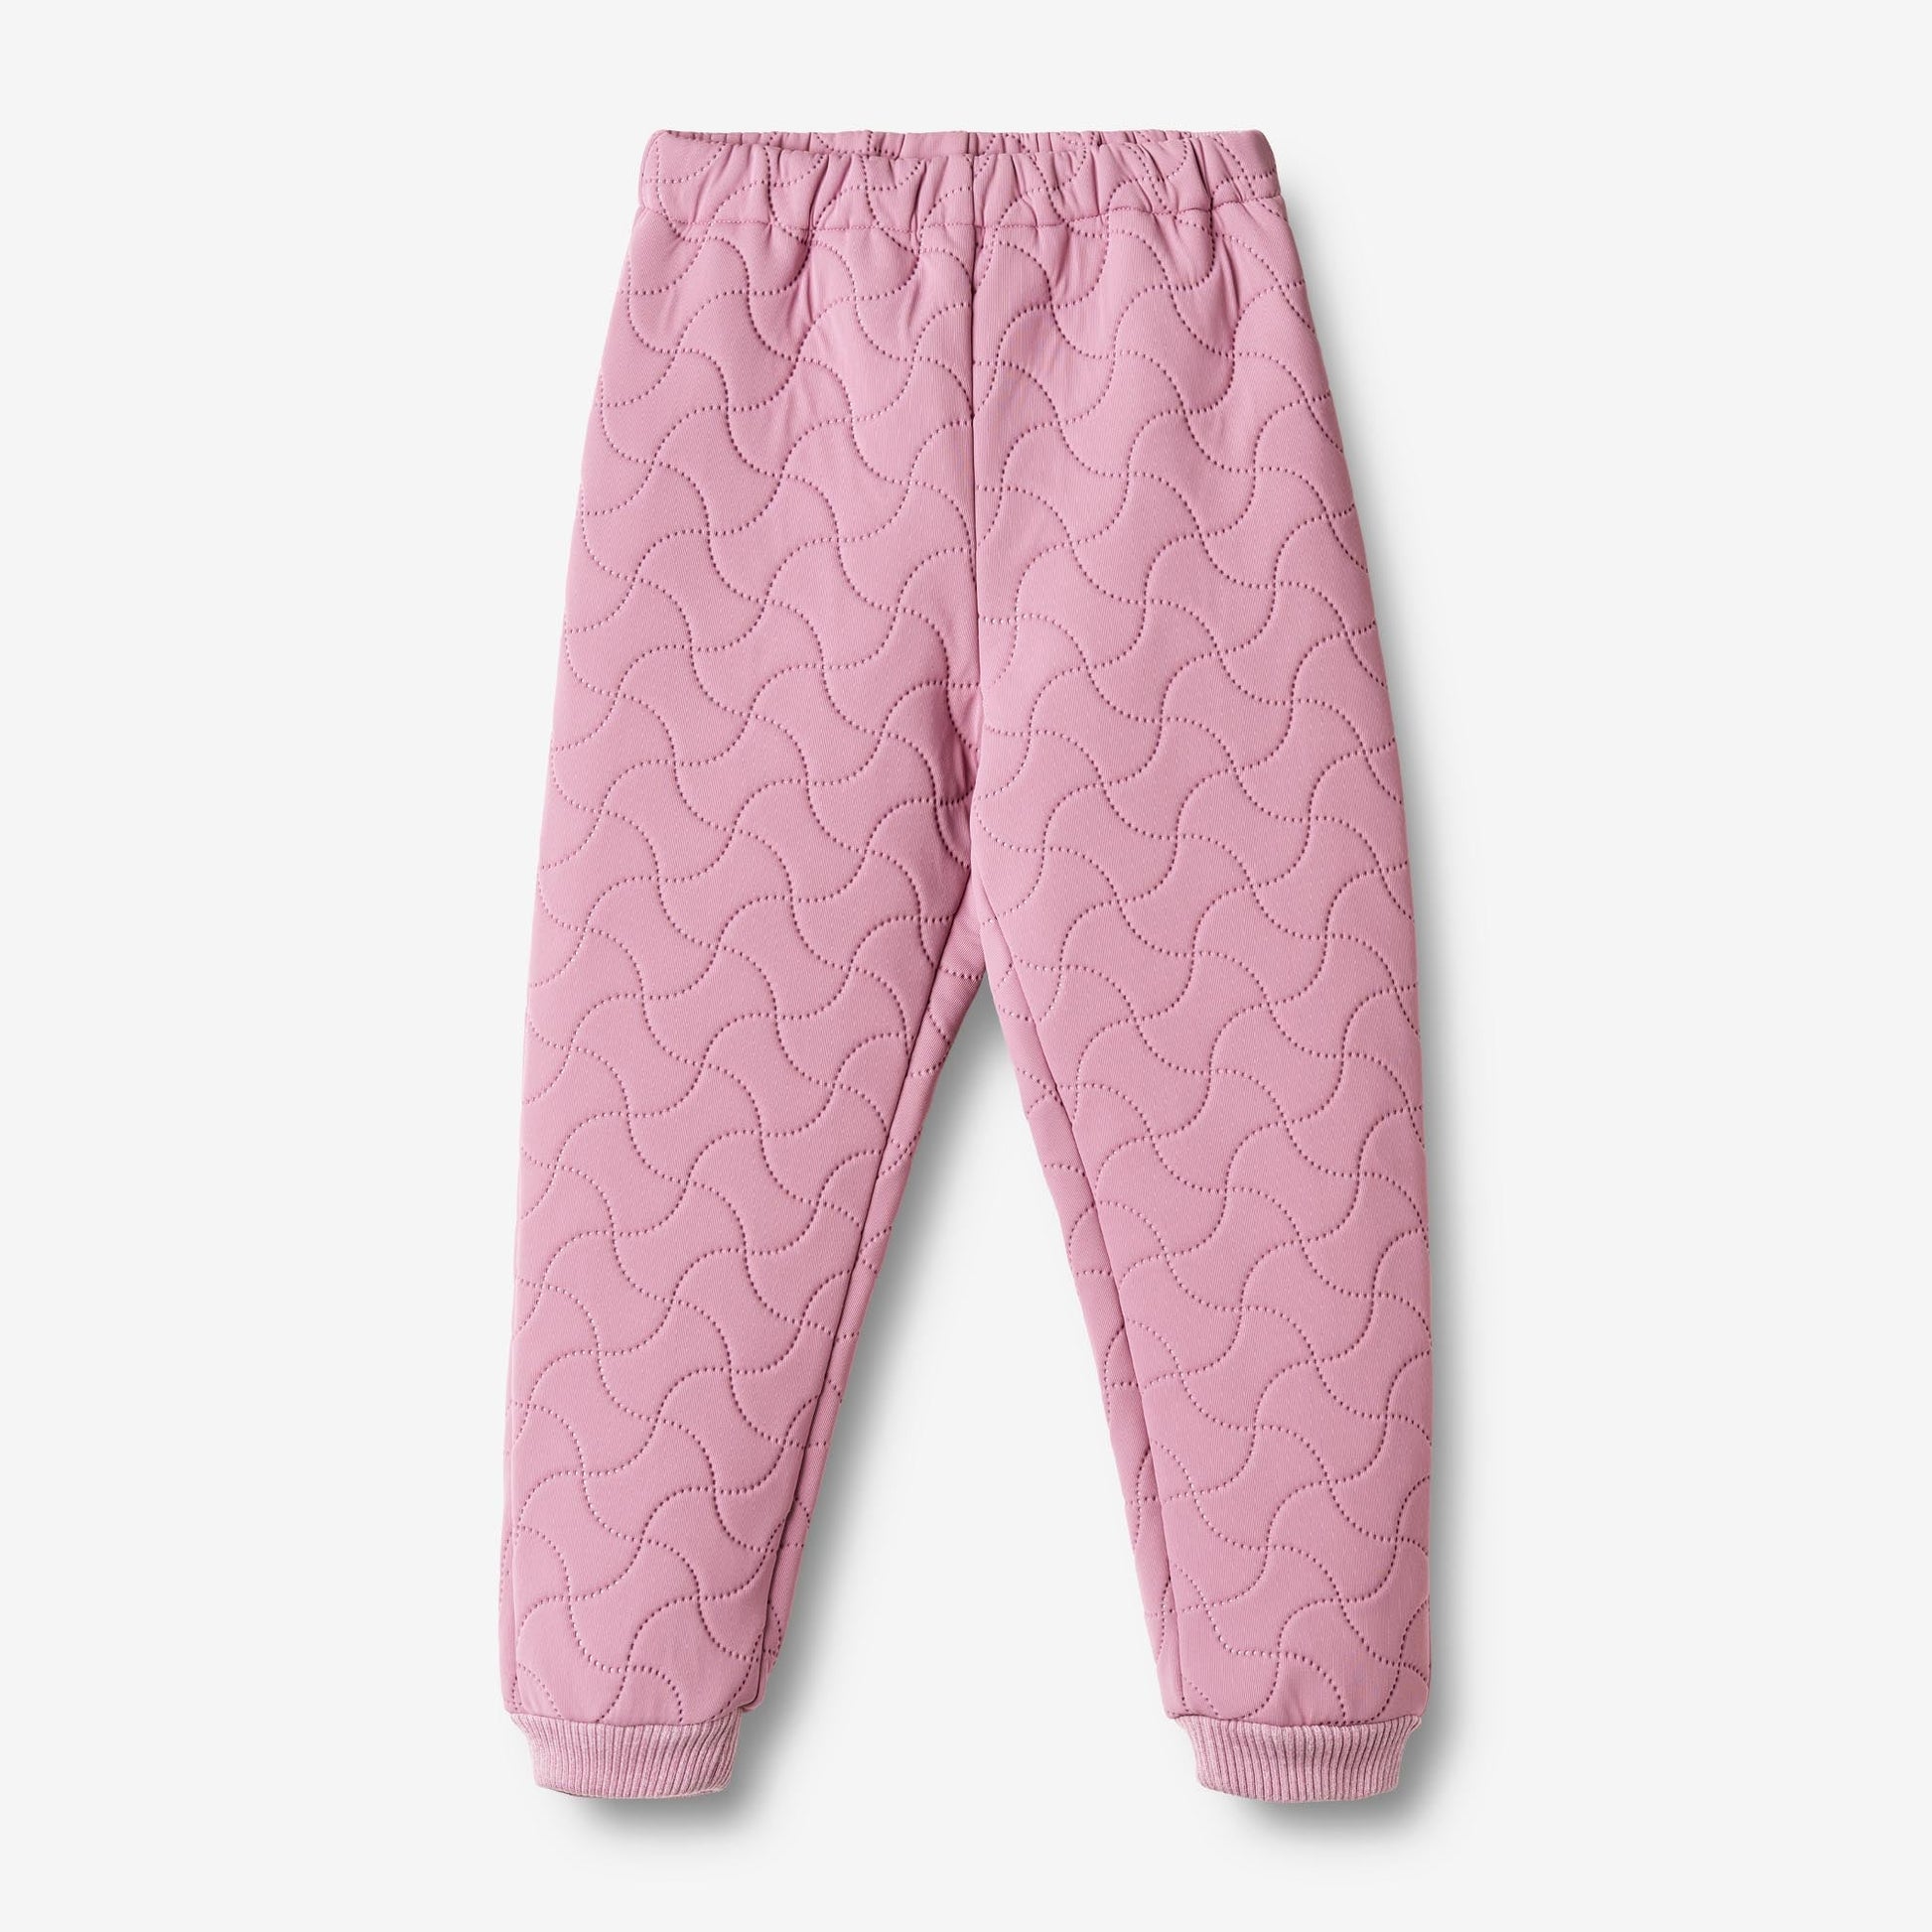 Wheat 'Alex' Children's Thermo Pants - Spring Lilac